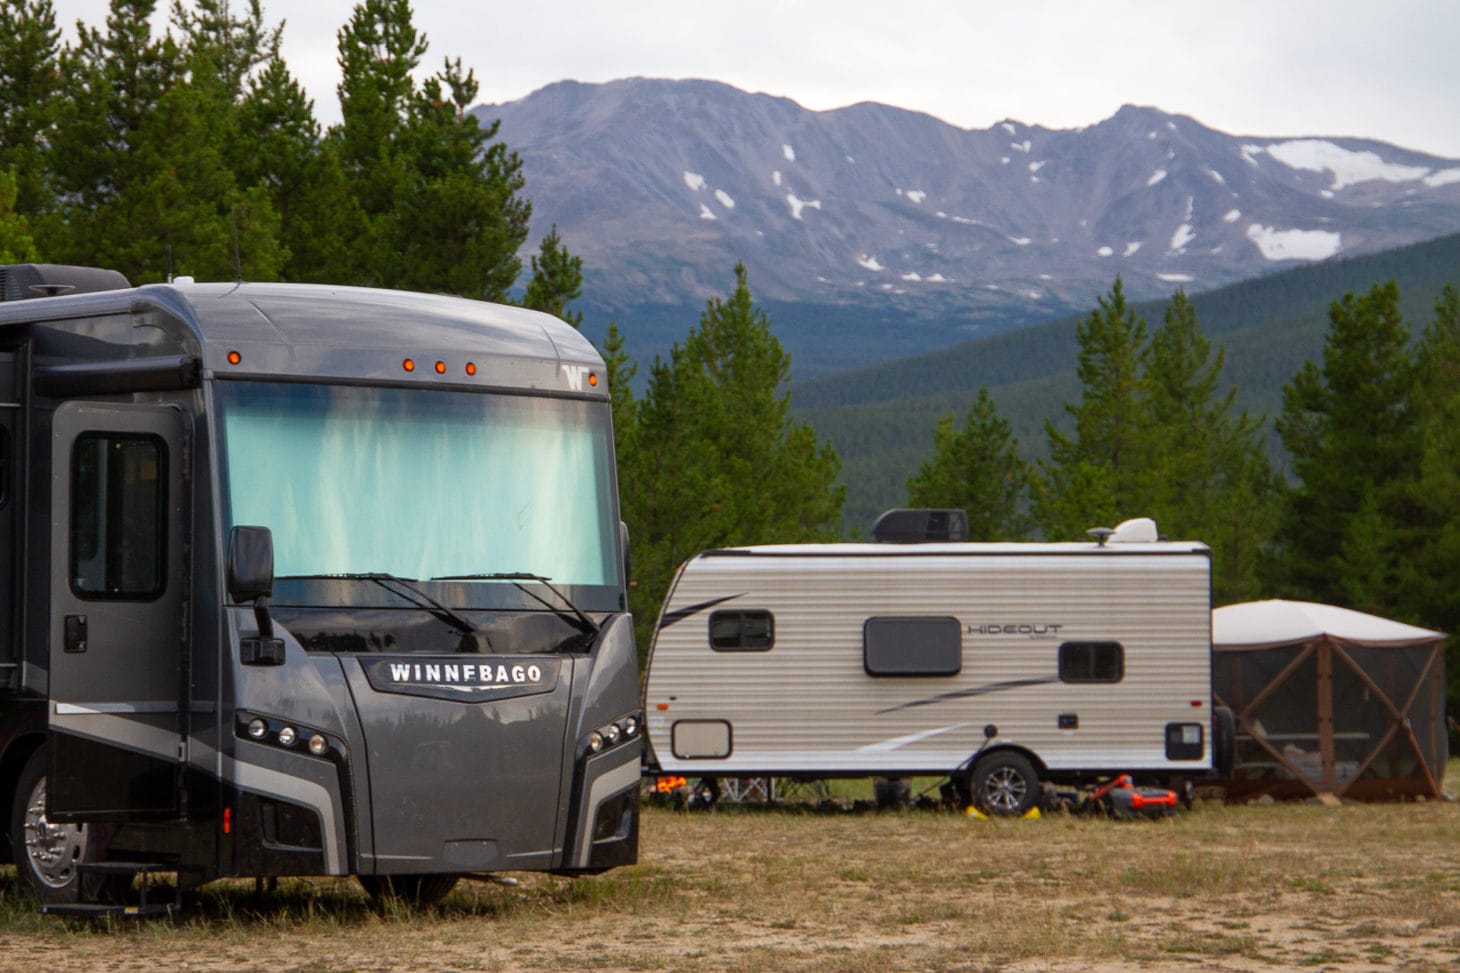 Motorhome and trailer parked for boondocking